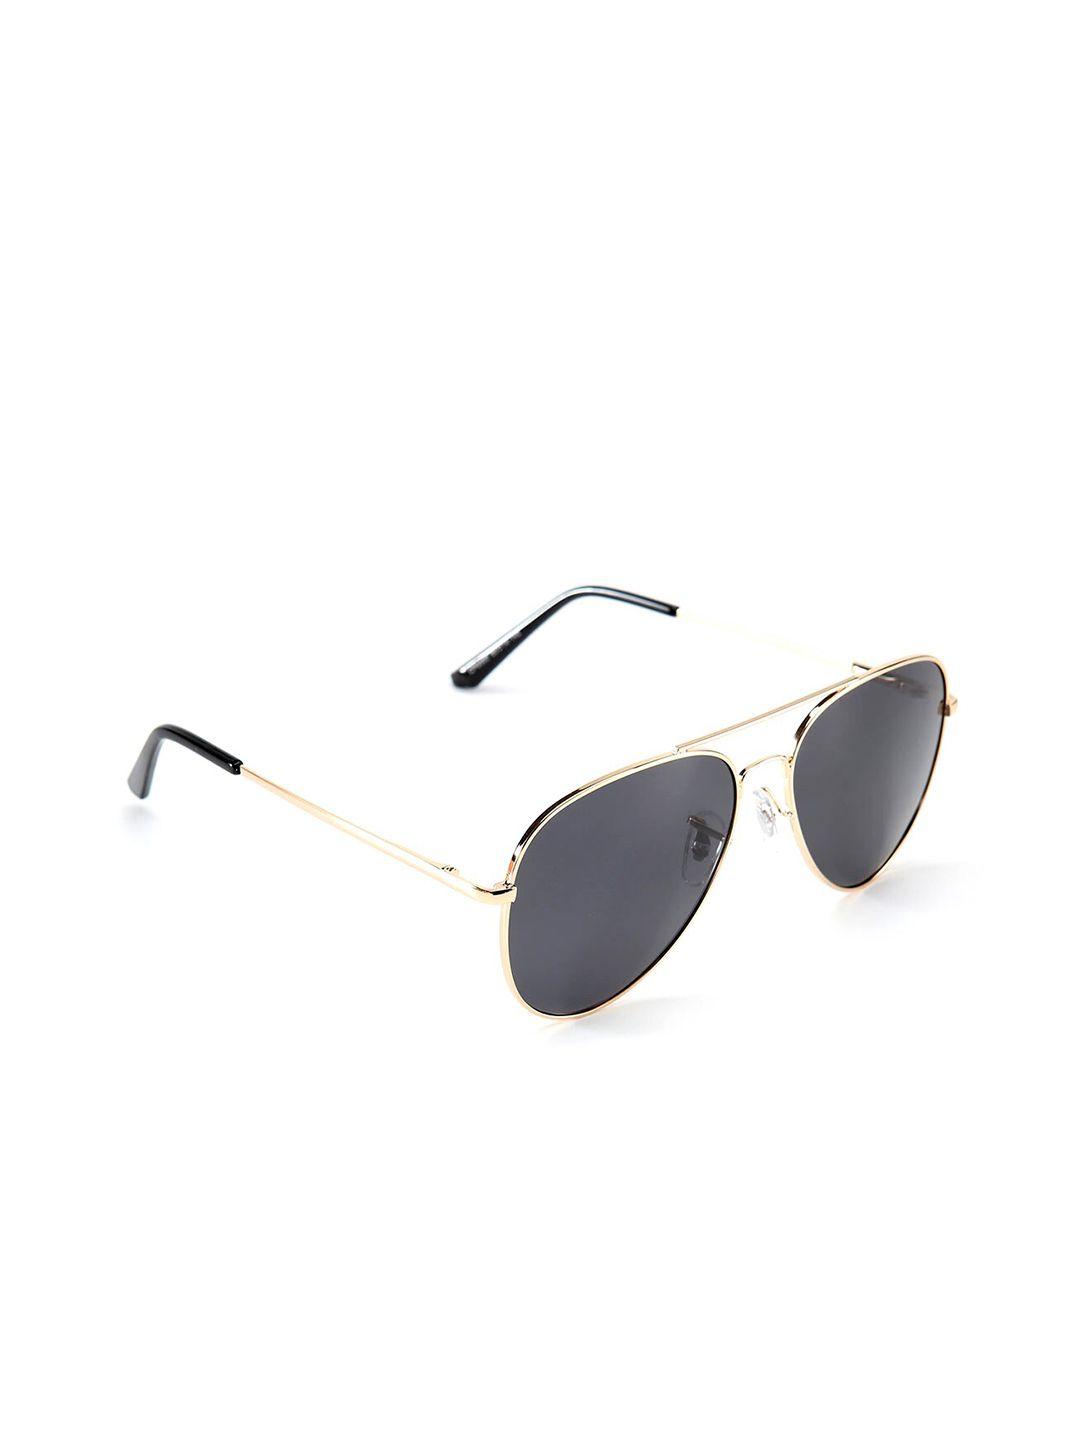 intellilens unisex black lens & gold-toned aviator sunglasses with polarised and uv protected lens